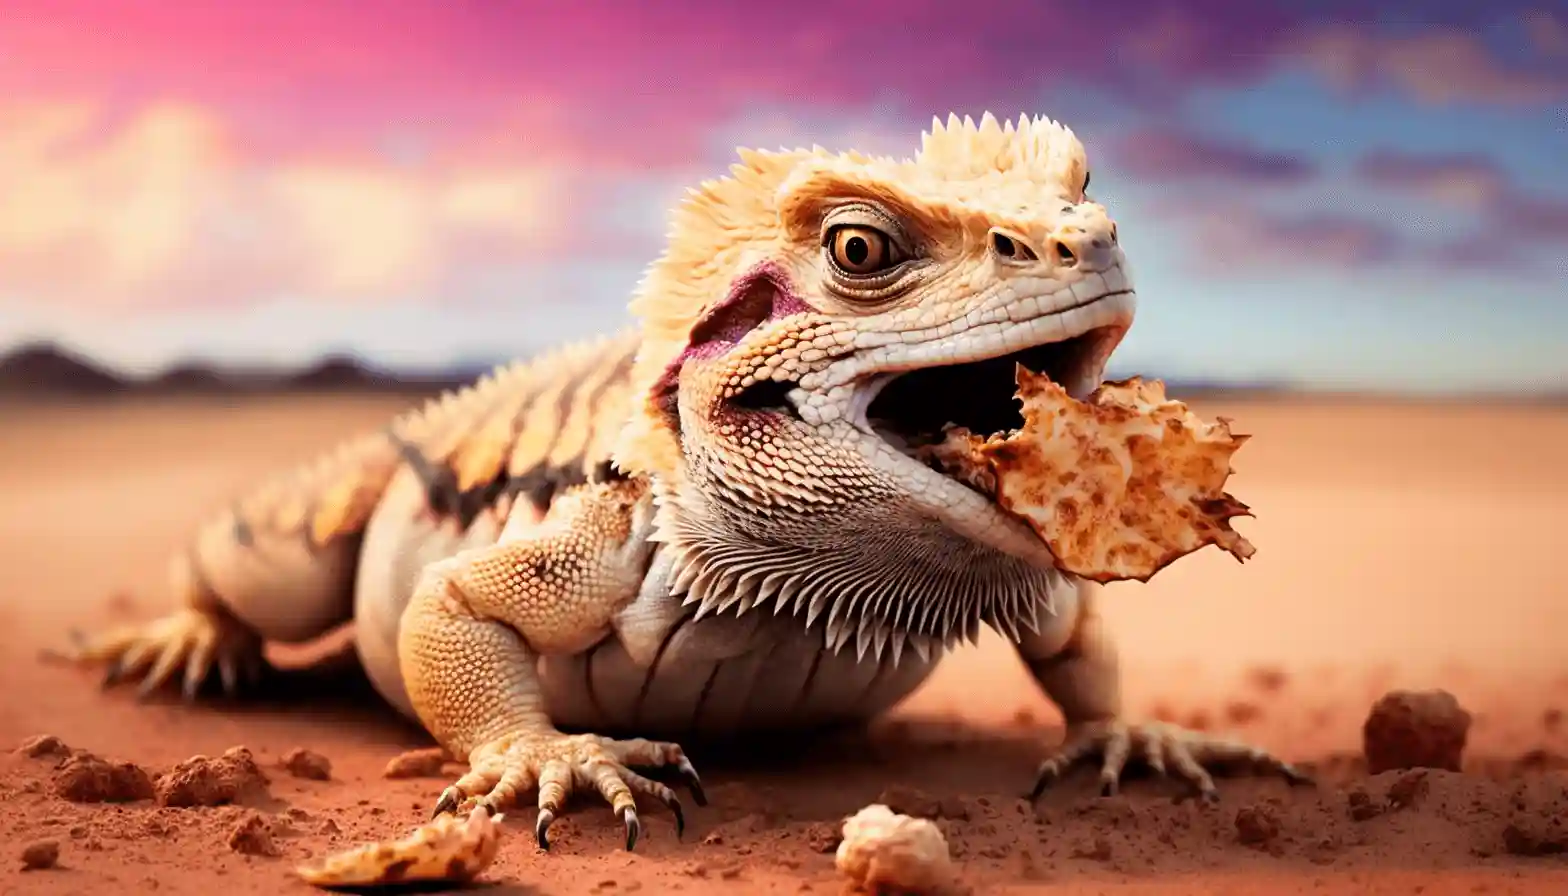 Can Bearded Dragons Eat Chicken?